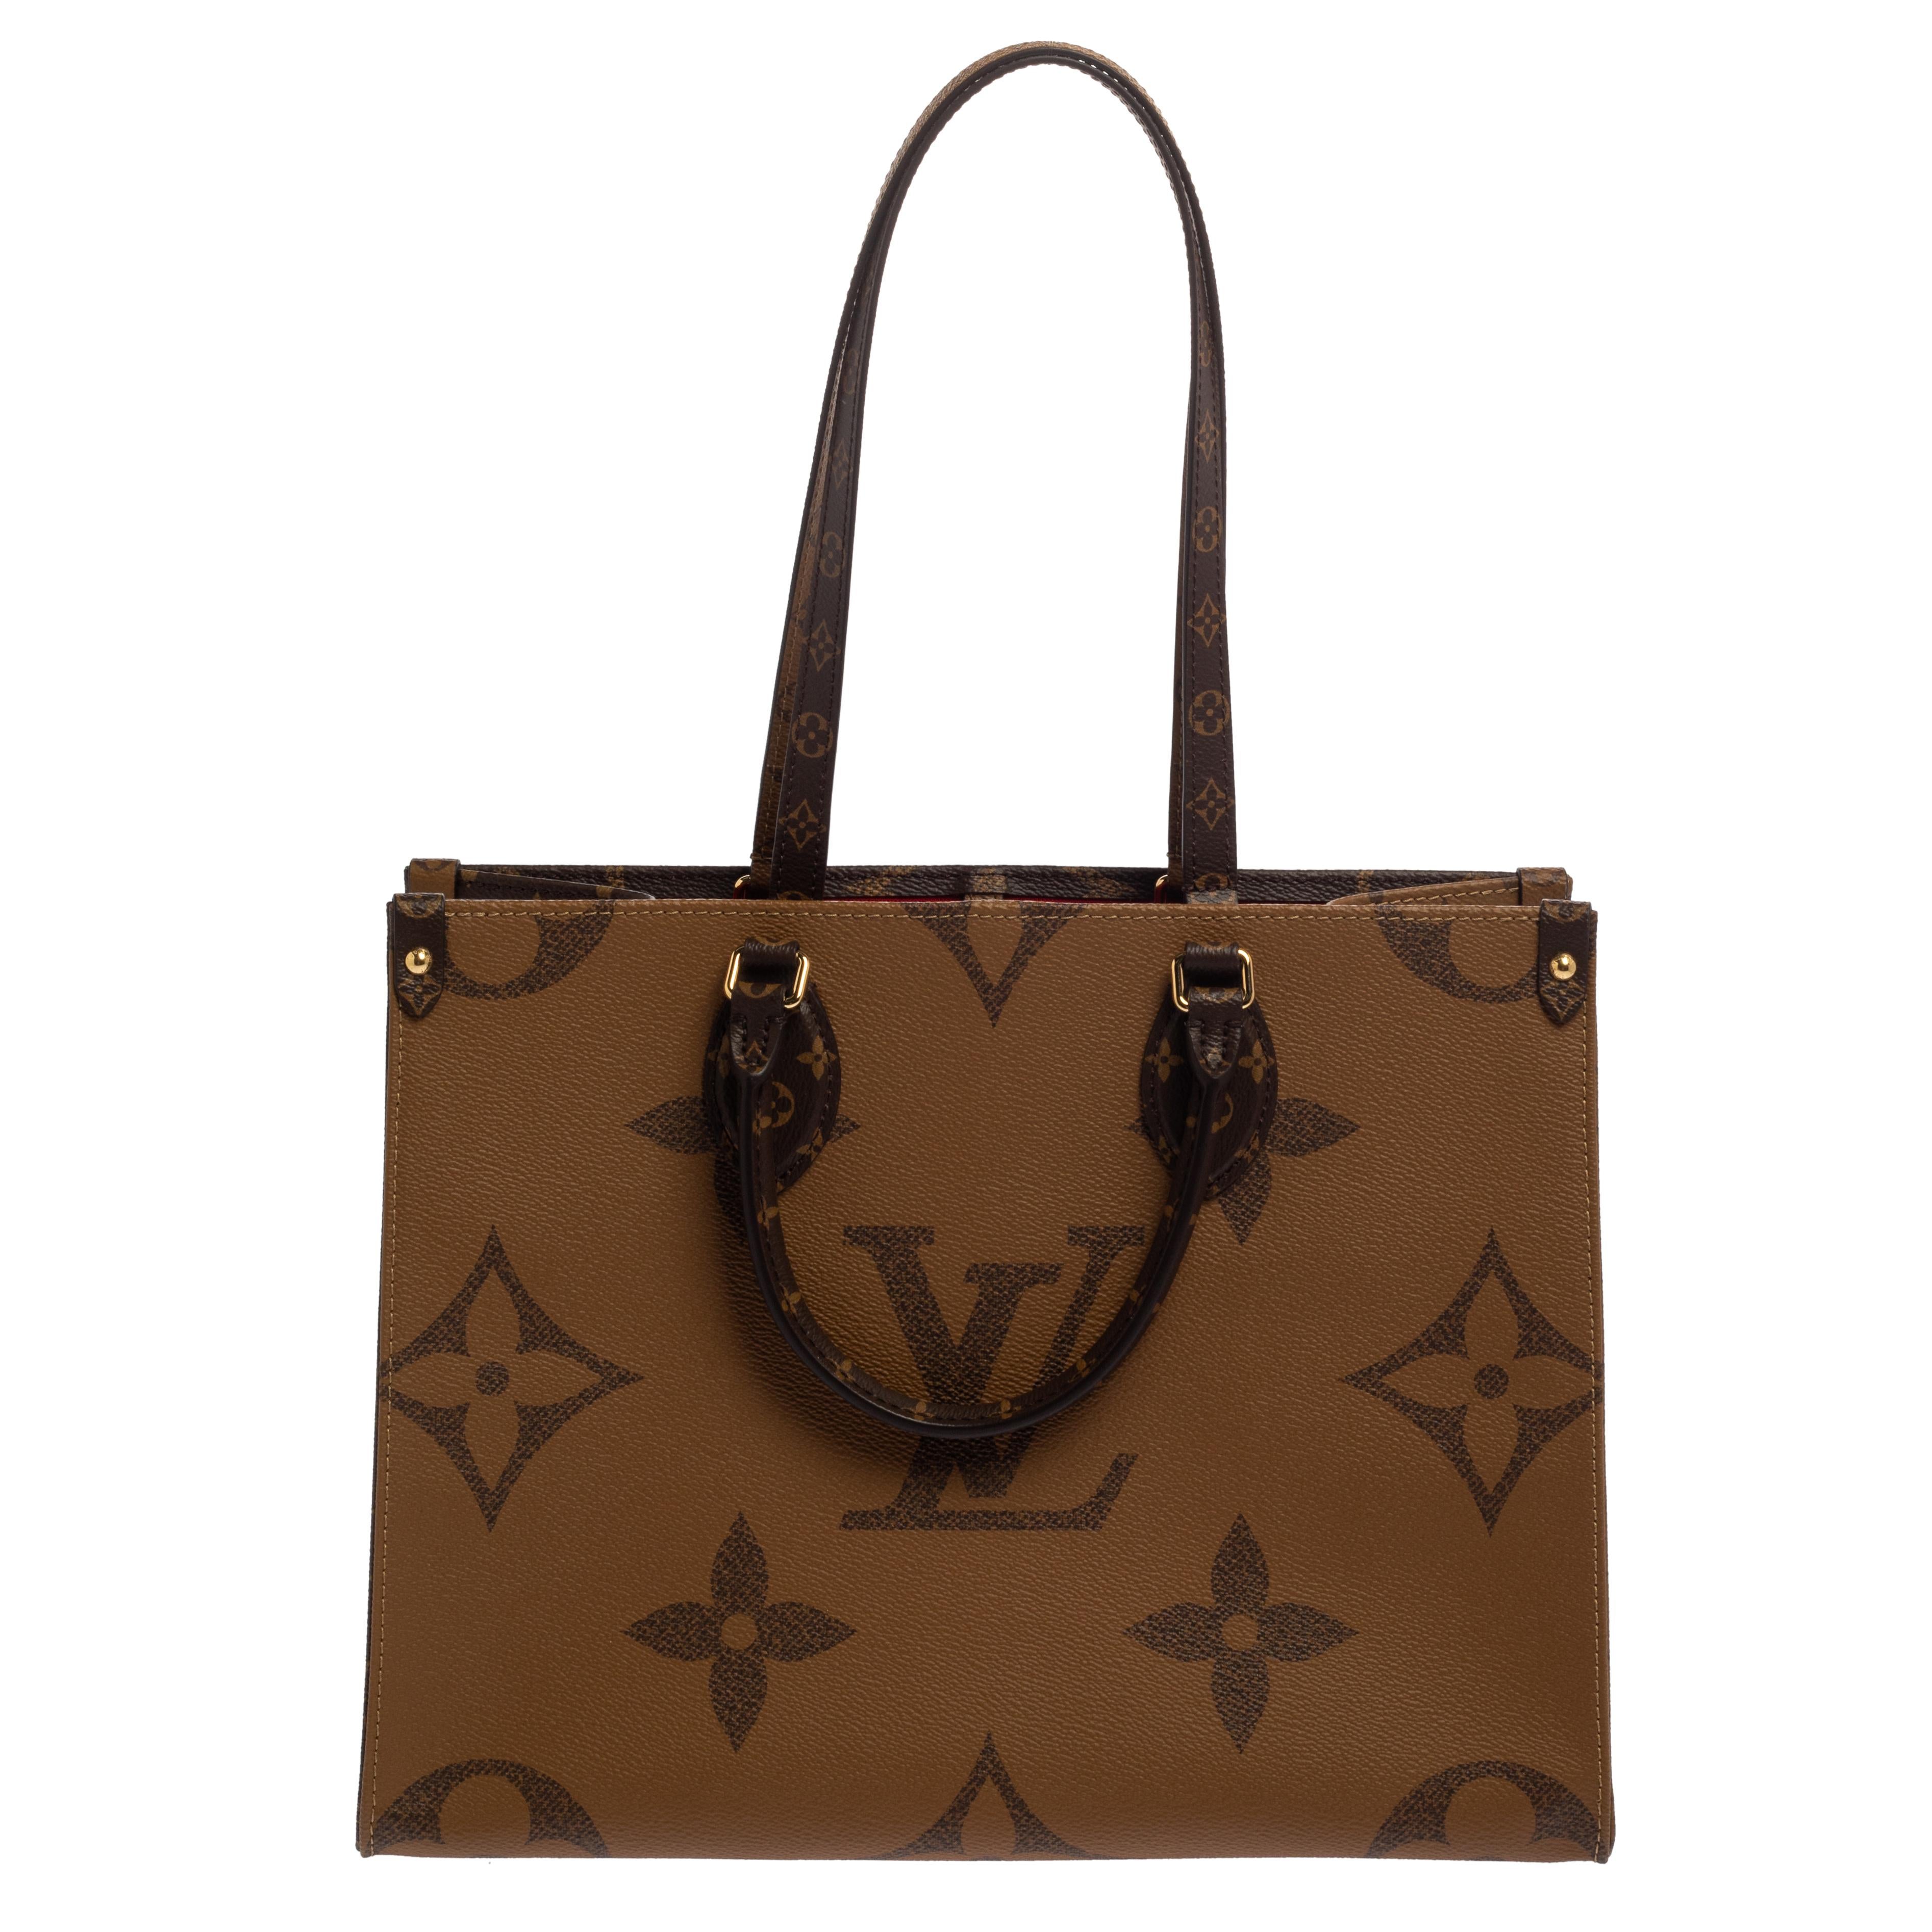 The Louis Vuitton Onthego bag is ideal for shopping sprees and daily commutes, with ample space for your essentials. The signature monogram canvas on one side and monogram reverse on the other gives the illusion of two bags in one. The top handles